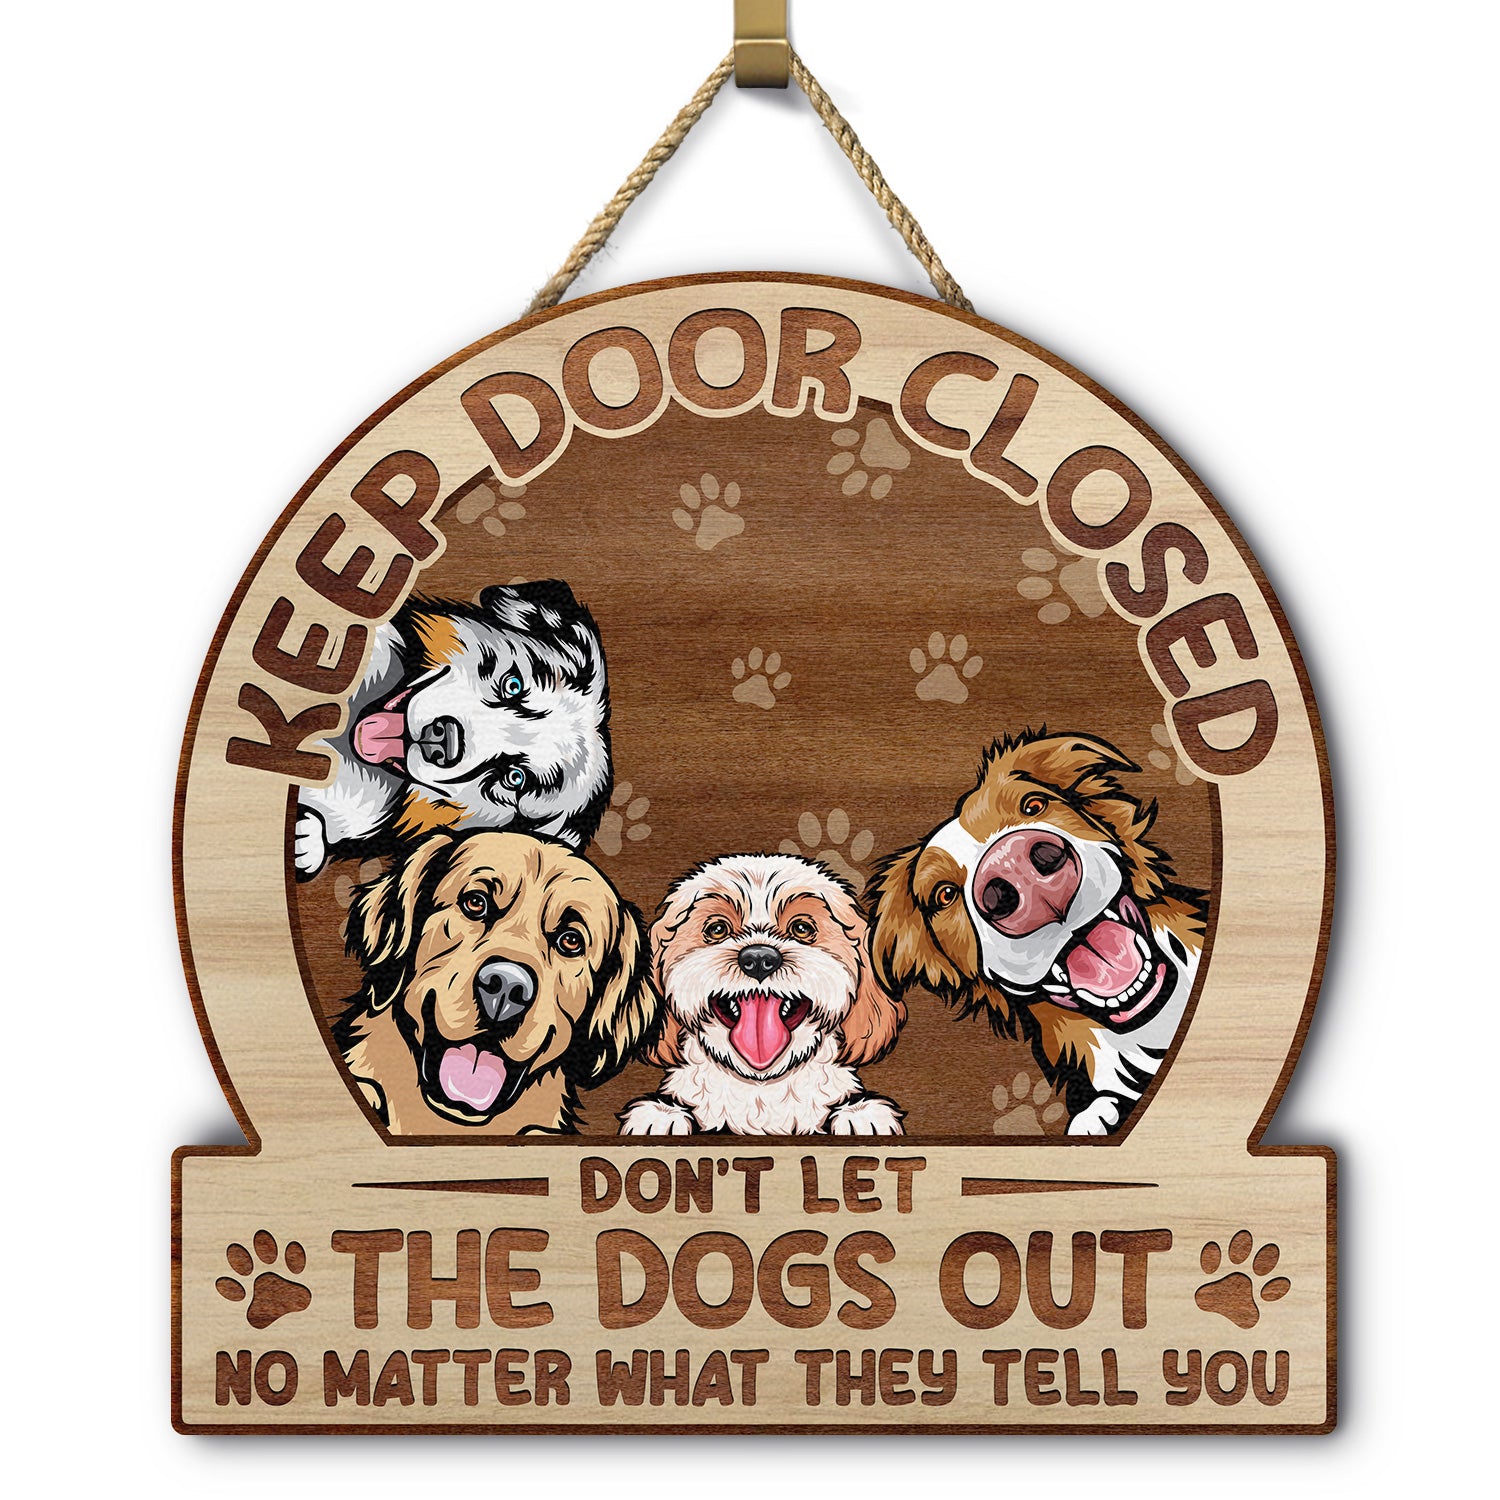 Keep Door Closed Don't Let The Dogs Out - Birthday, Housewarming Gift For Dog Lovers & Cat Lovers - Personalized Custom Shaped Wood Sign